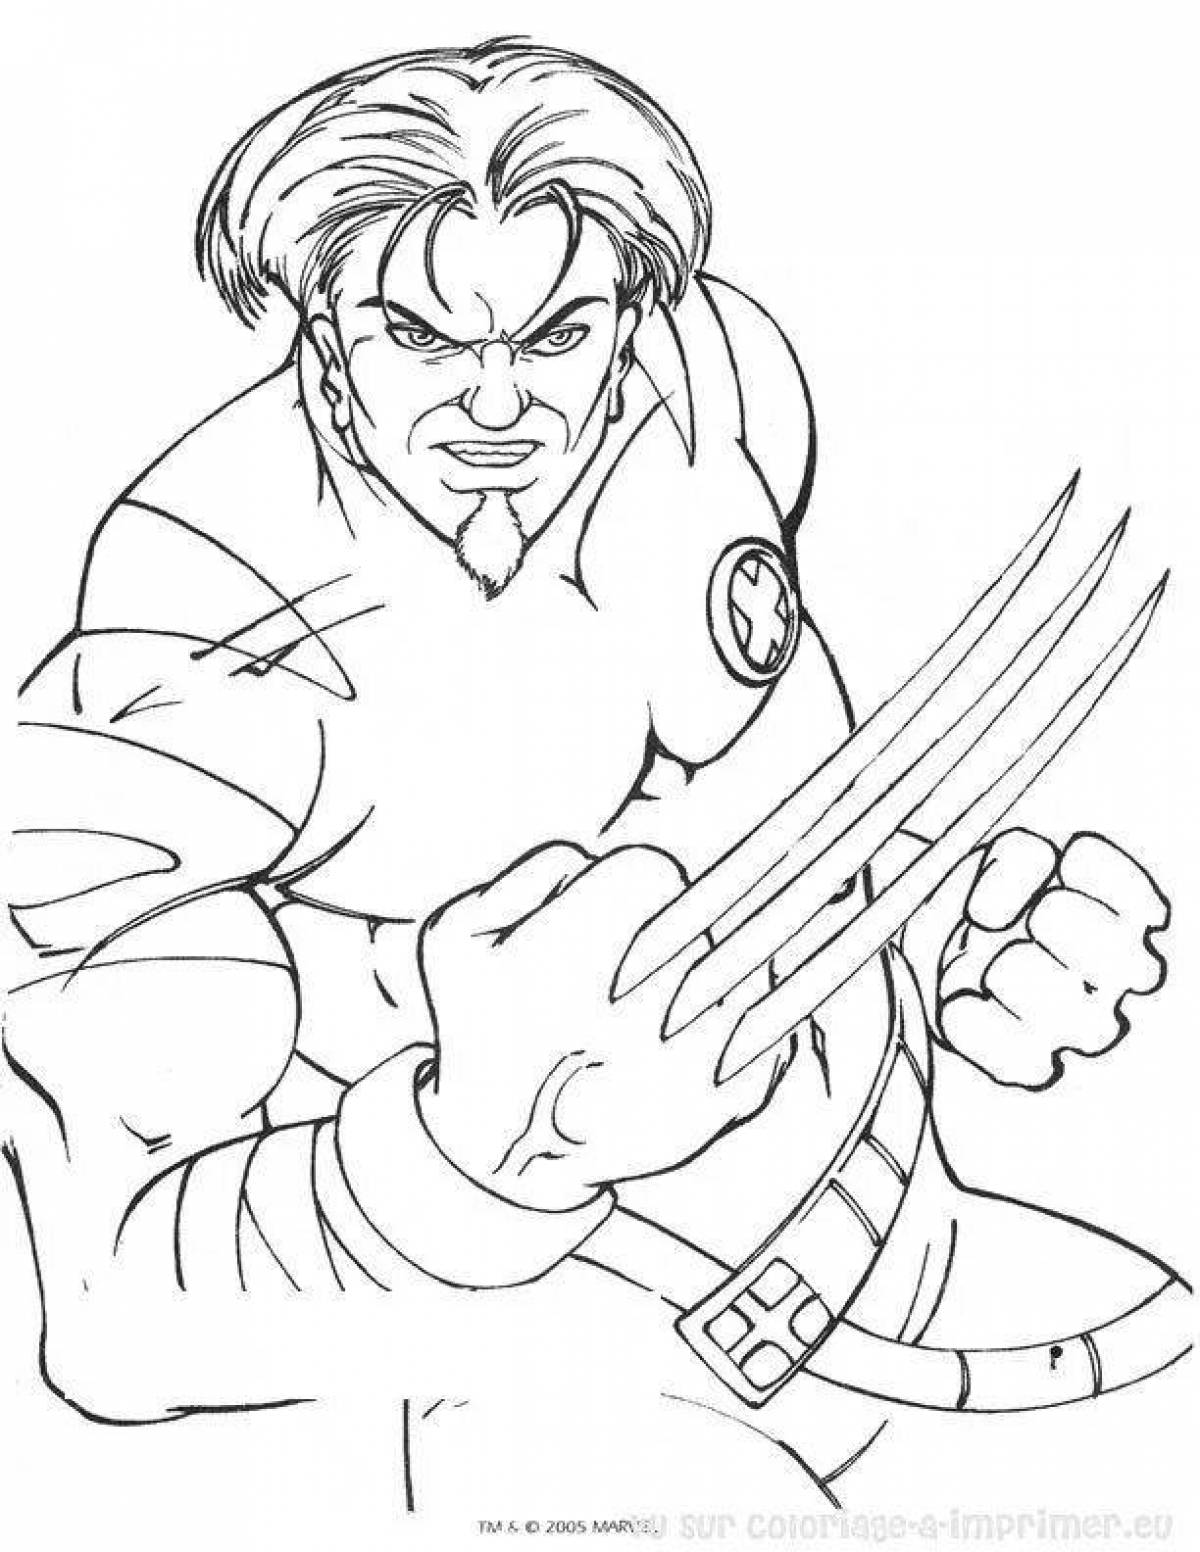 Charming xavier coloring page